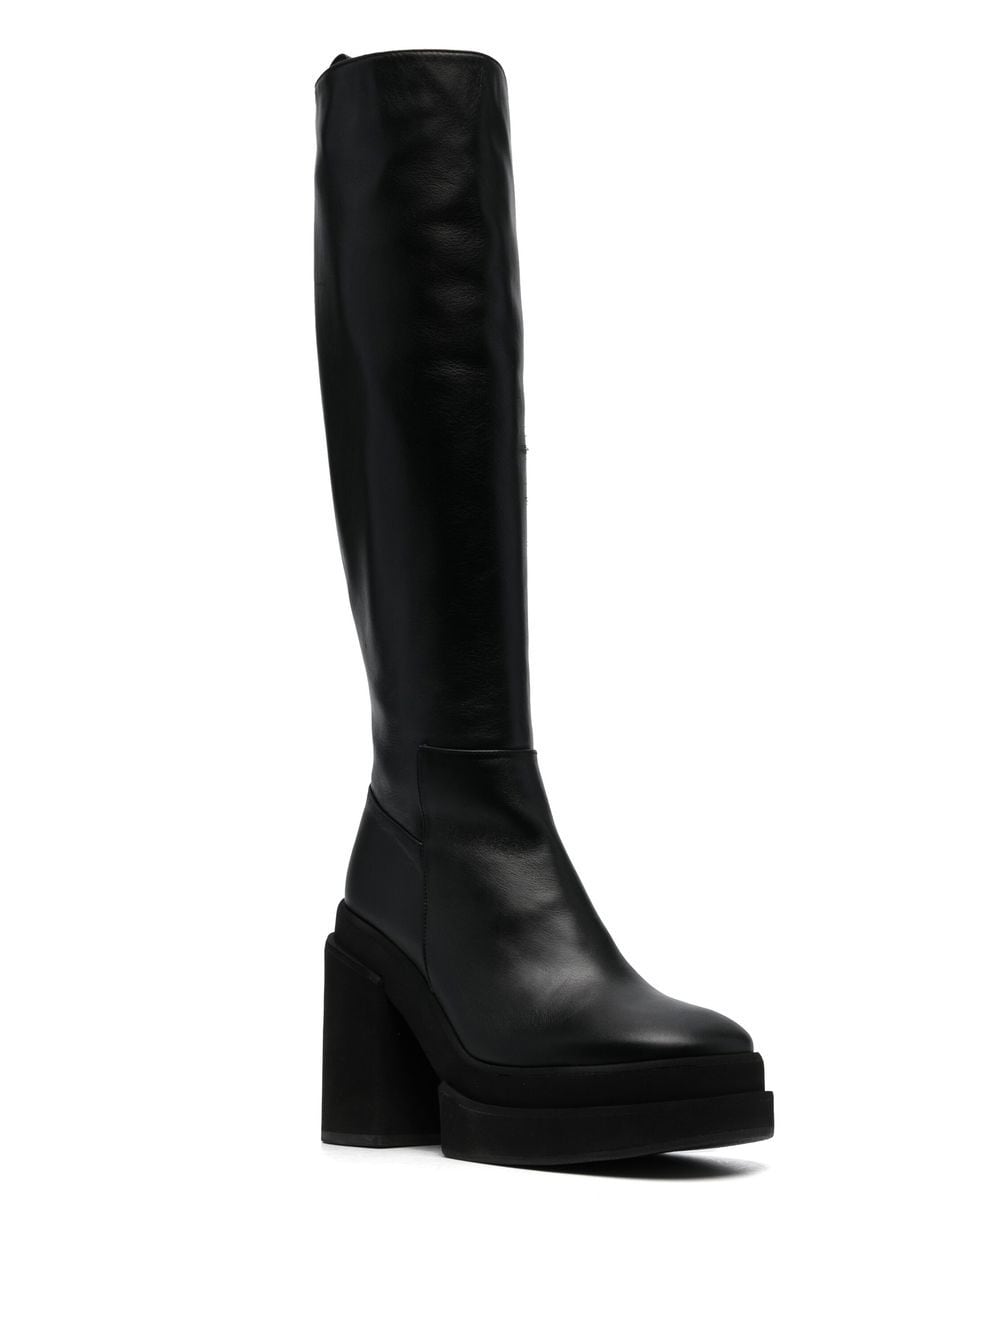 Image 2 of Paloma Barceló high-heel knee-length boots